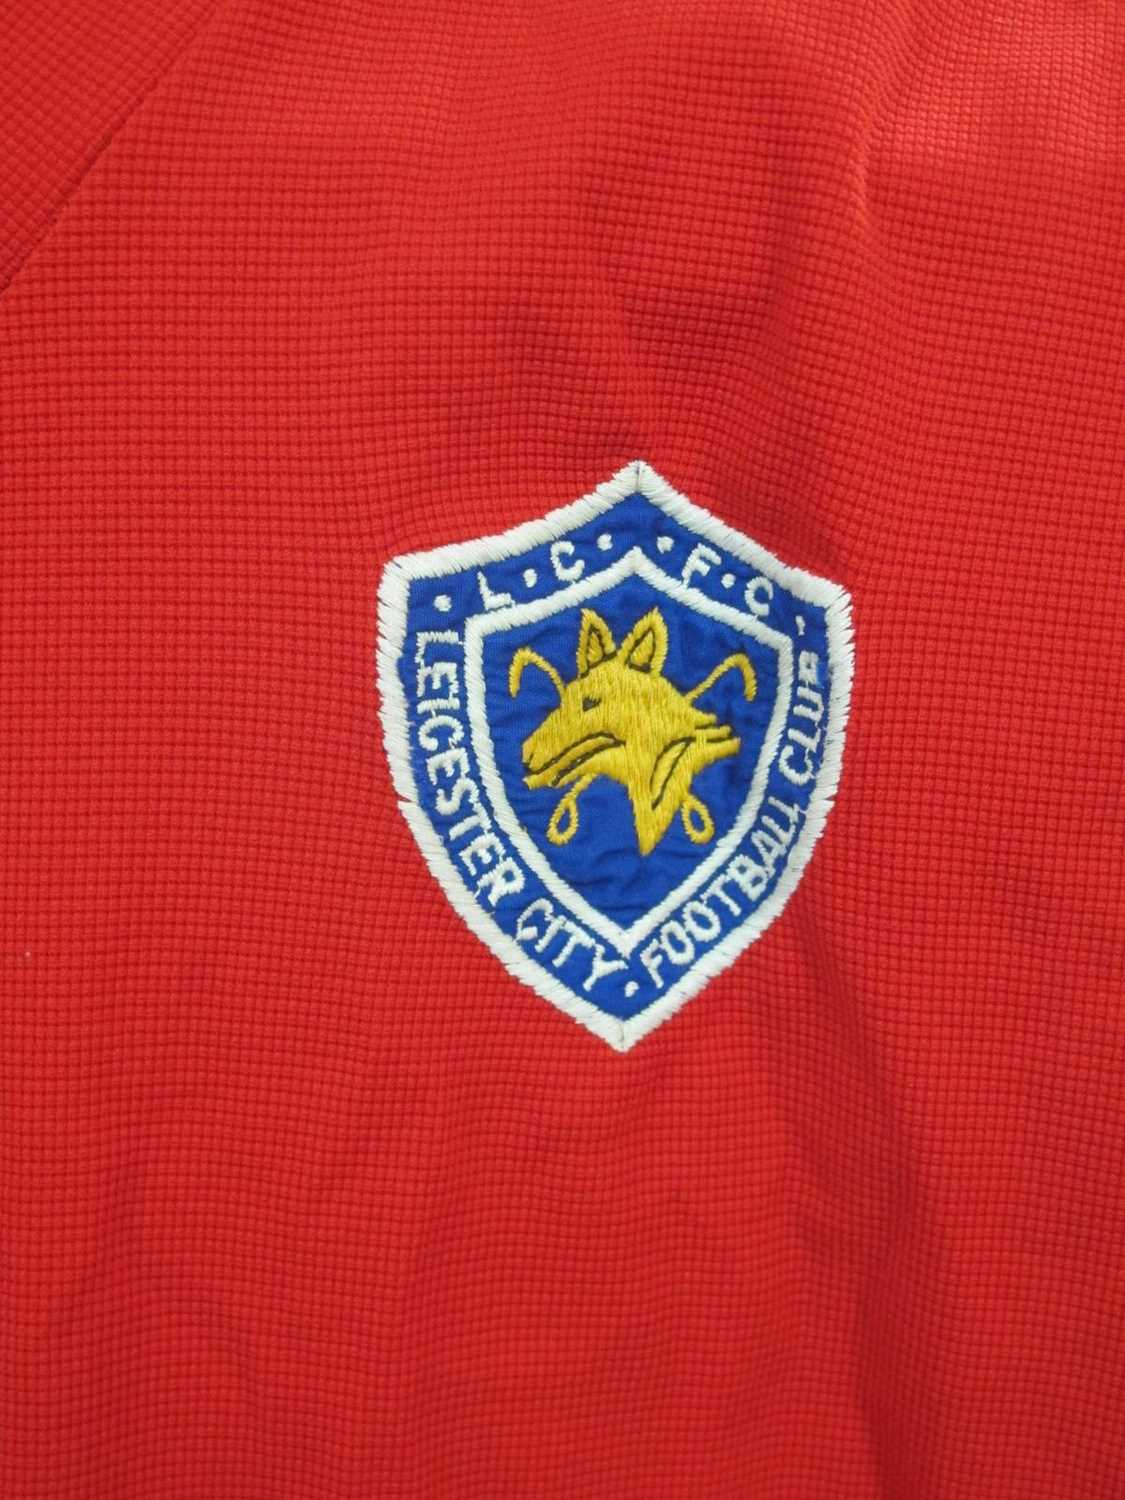 Leicester City Umbro Red Away Shirt, with striped collar and fox in shield badge, Number 3 to - Image 4 of 6